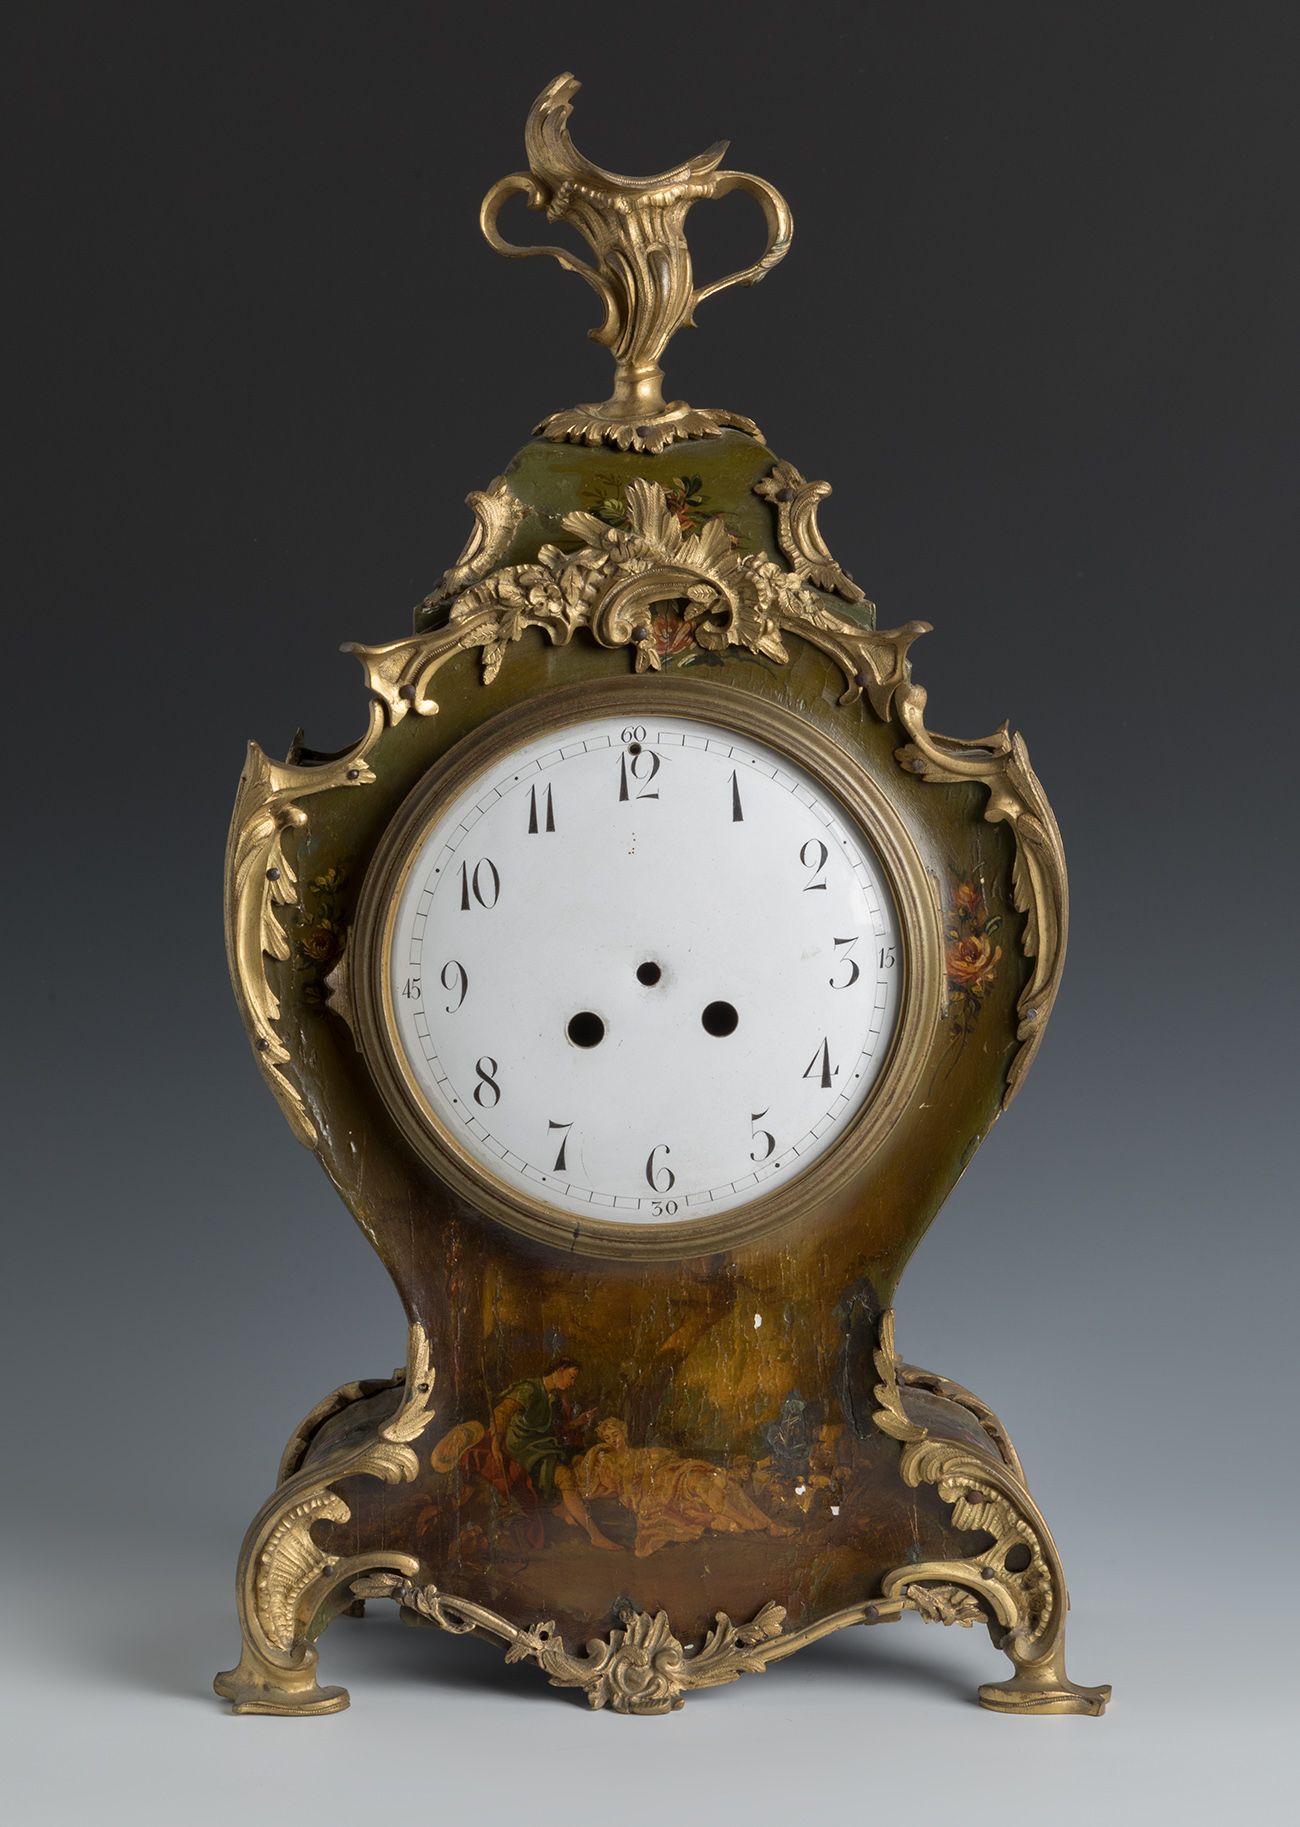 Null Rococo style clock. France, 19th century.
Polychrome wood and bronze orname&hellip;